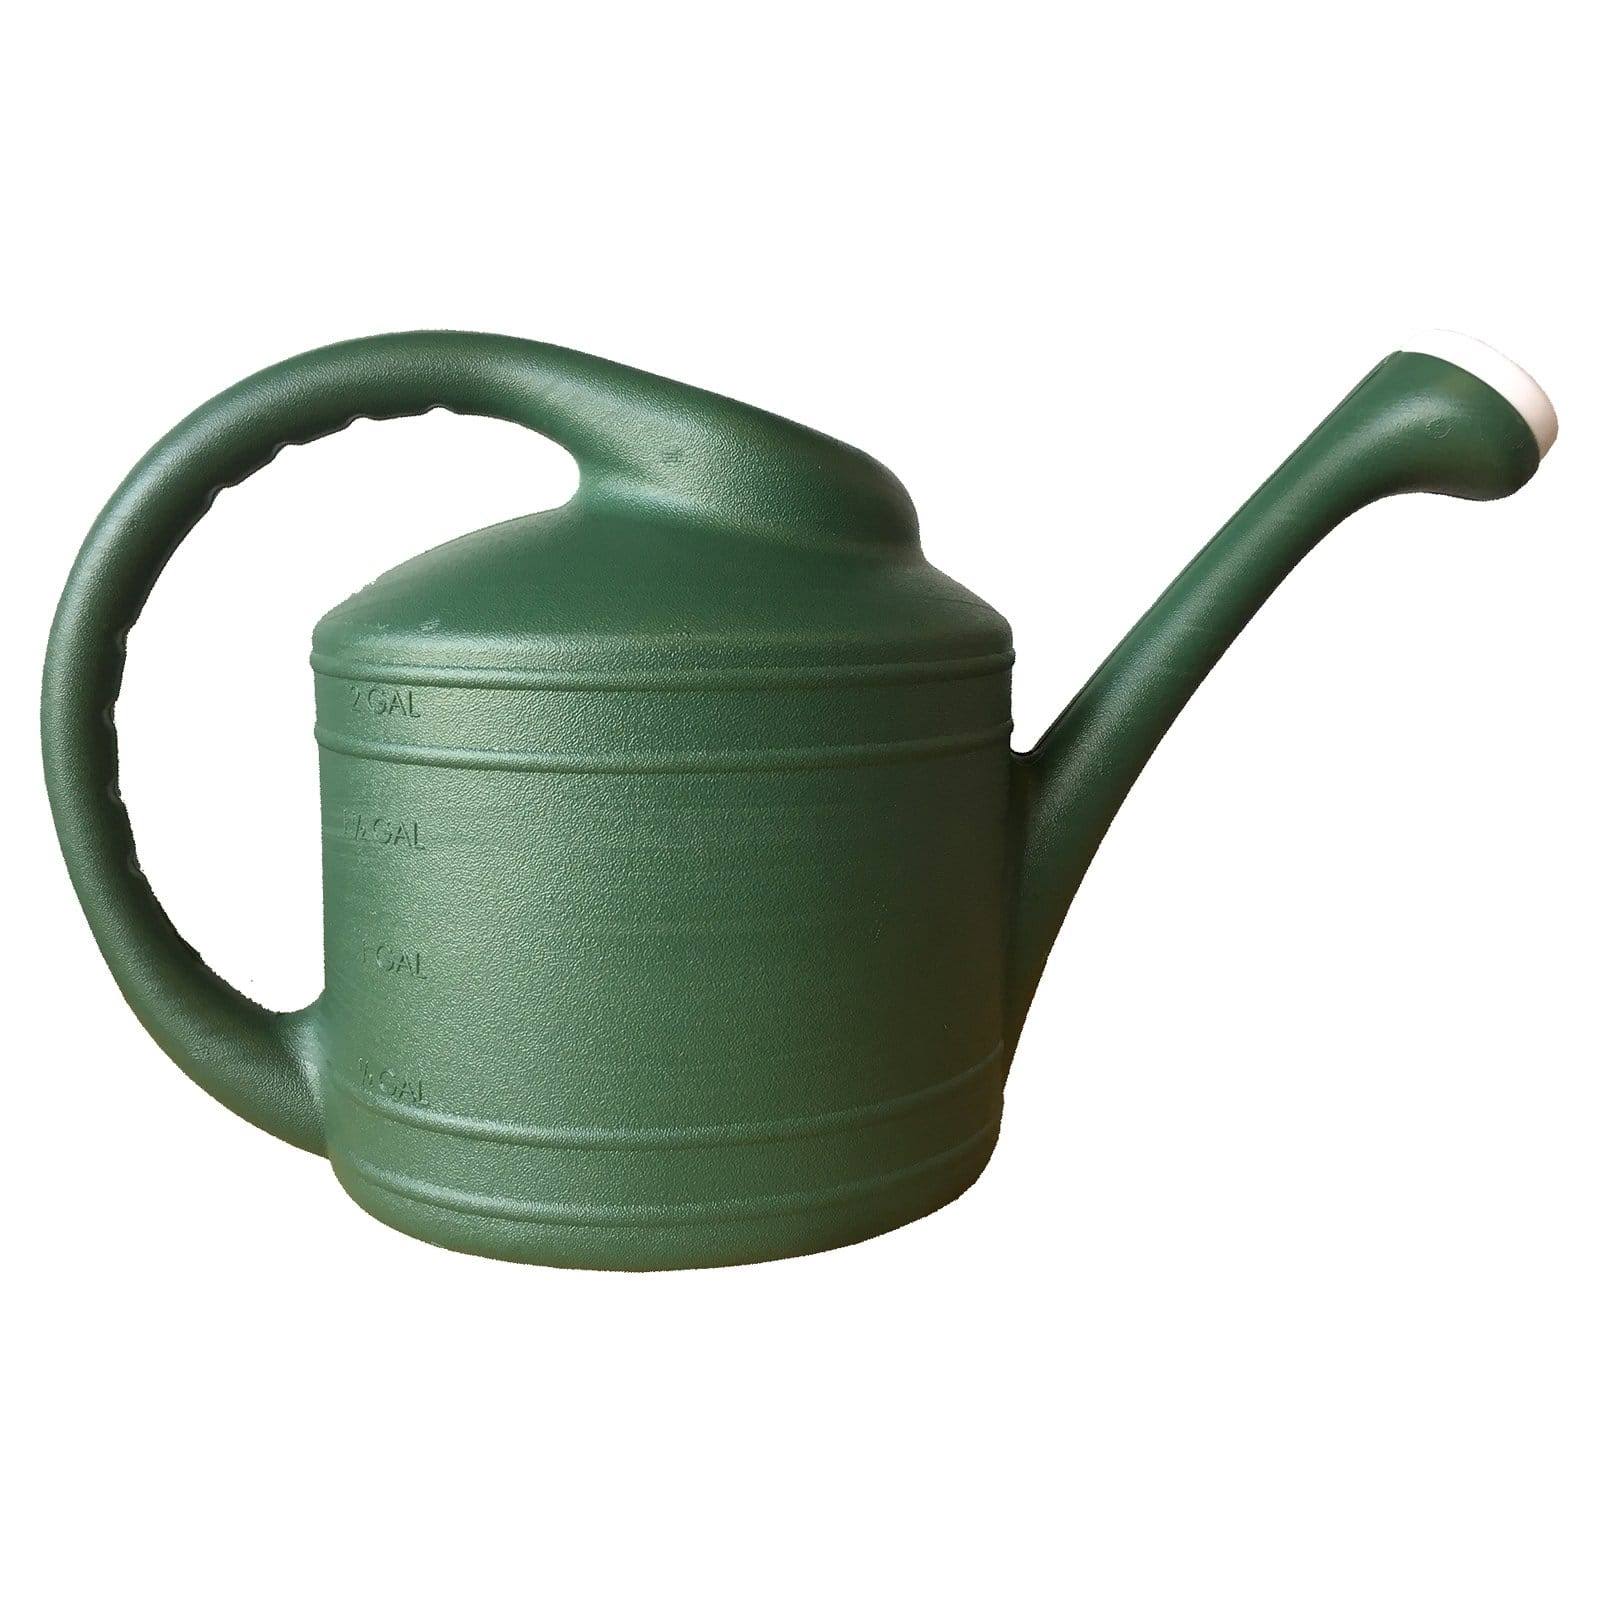 Southern Patio Watering Can - Fern Green, 2 Gallon